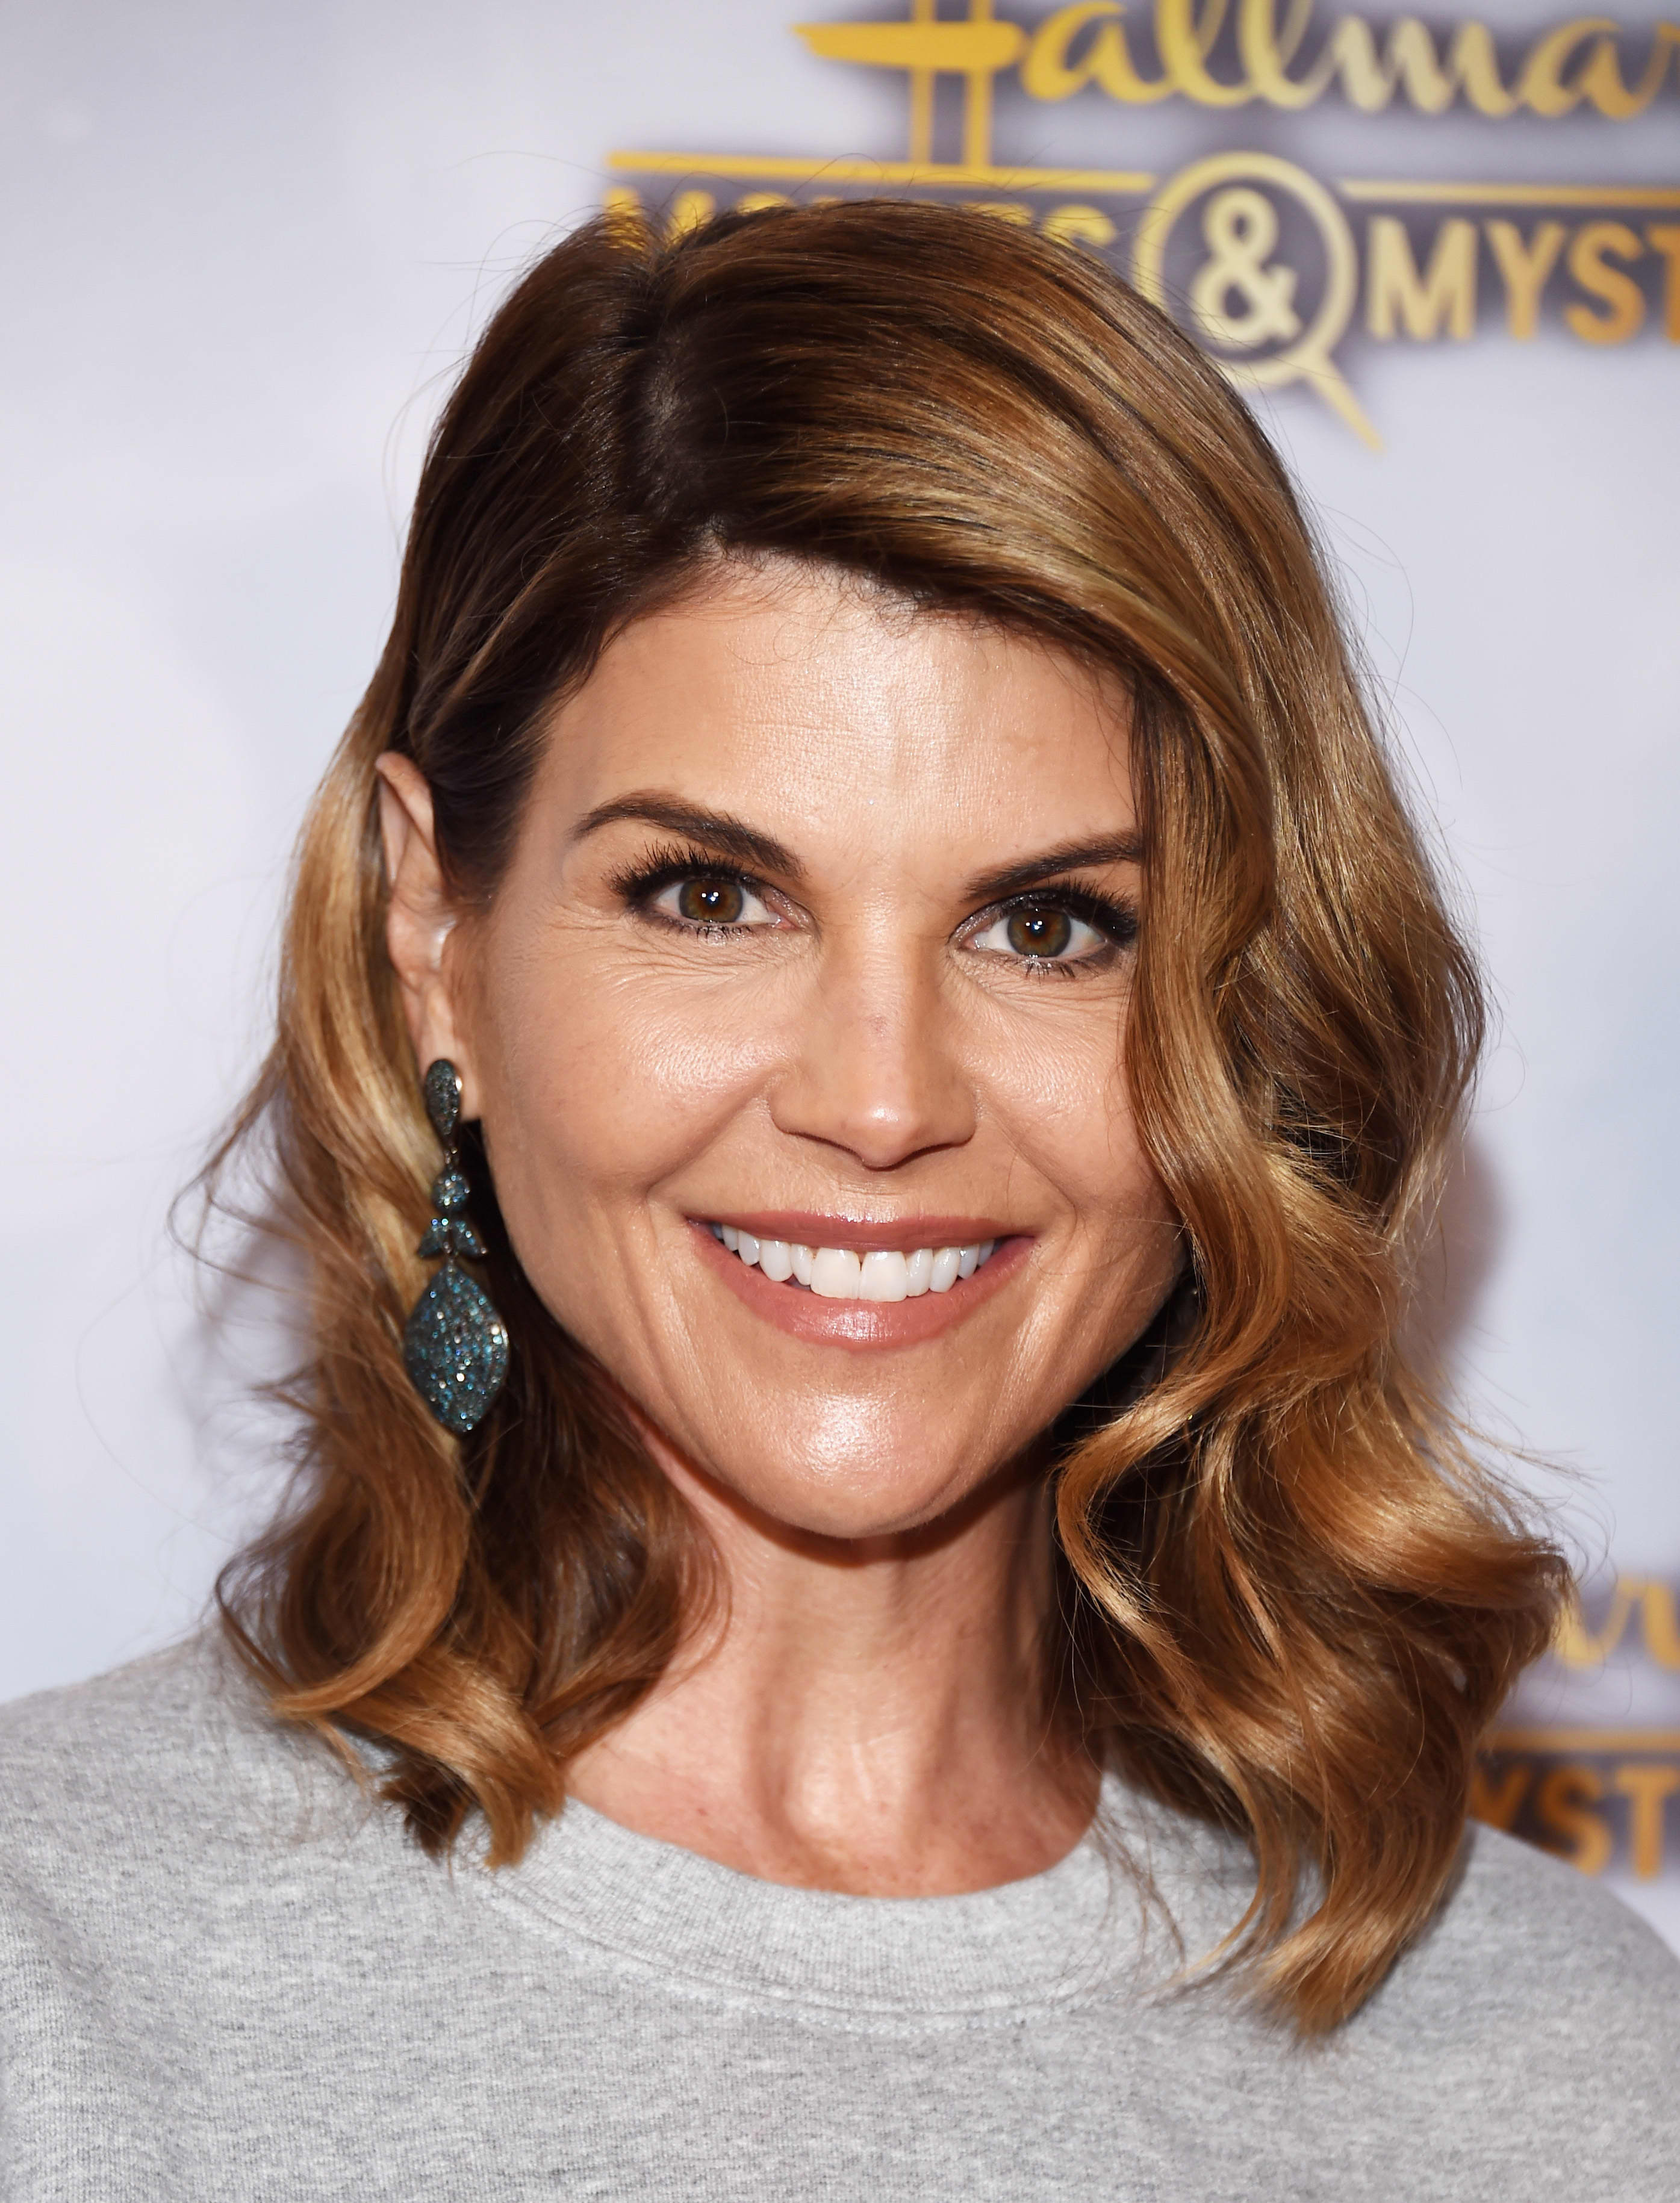 Lori Loughlin loses starring roles on Hallmark Channel.